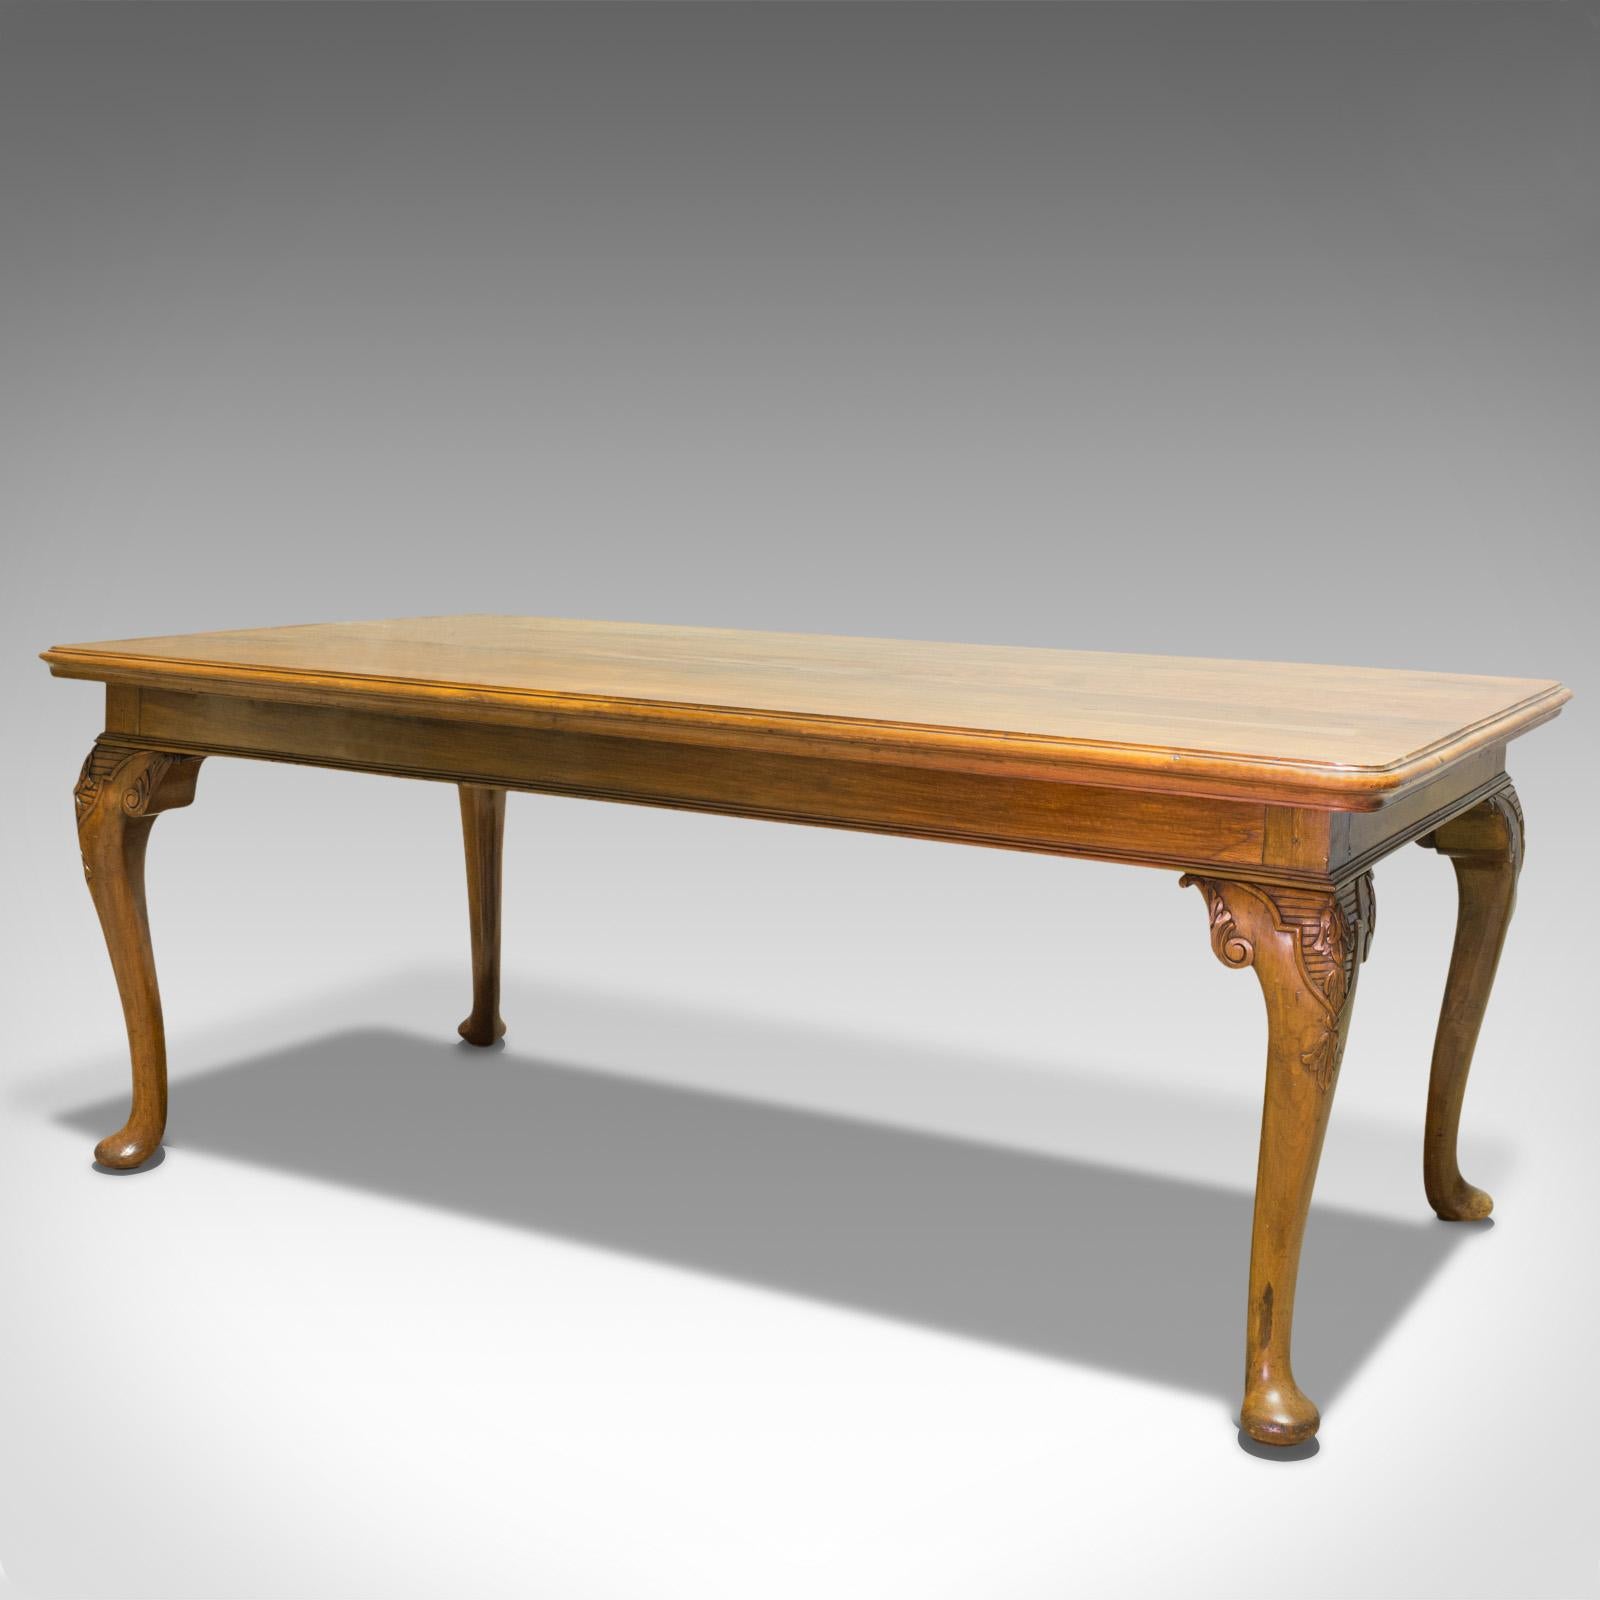 French Provincial Large Antique Dining Table, French, Walnut, Country House, Seats 6, circa 1900